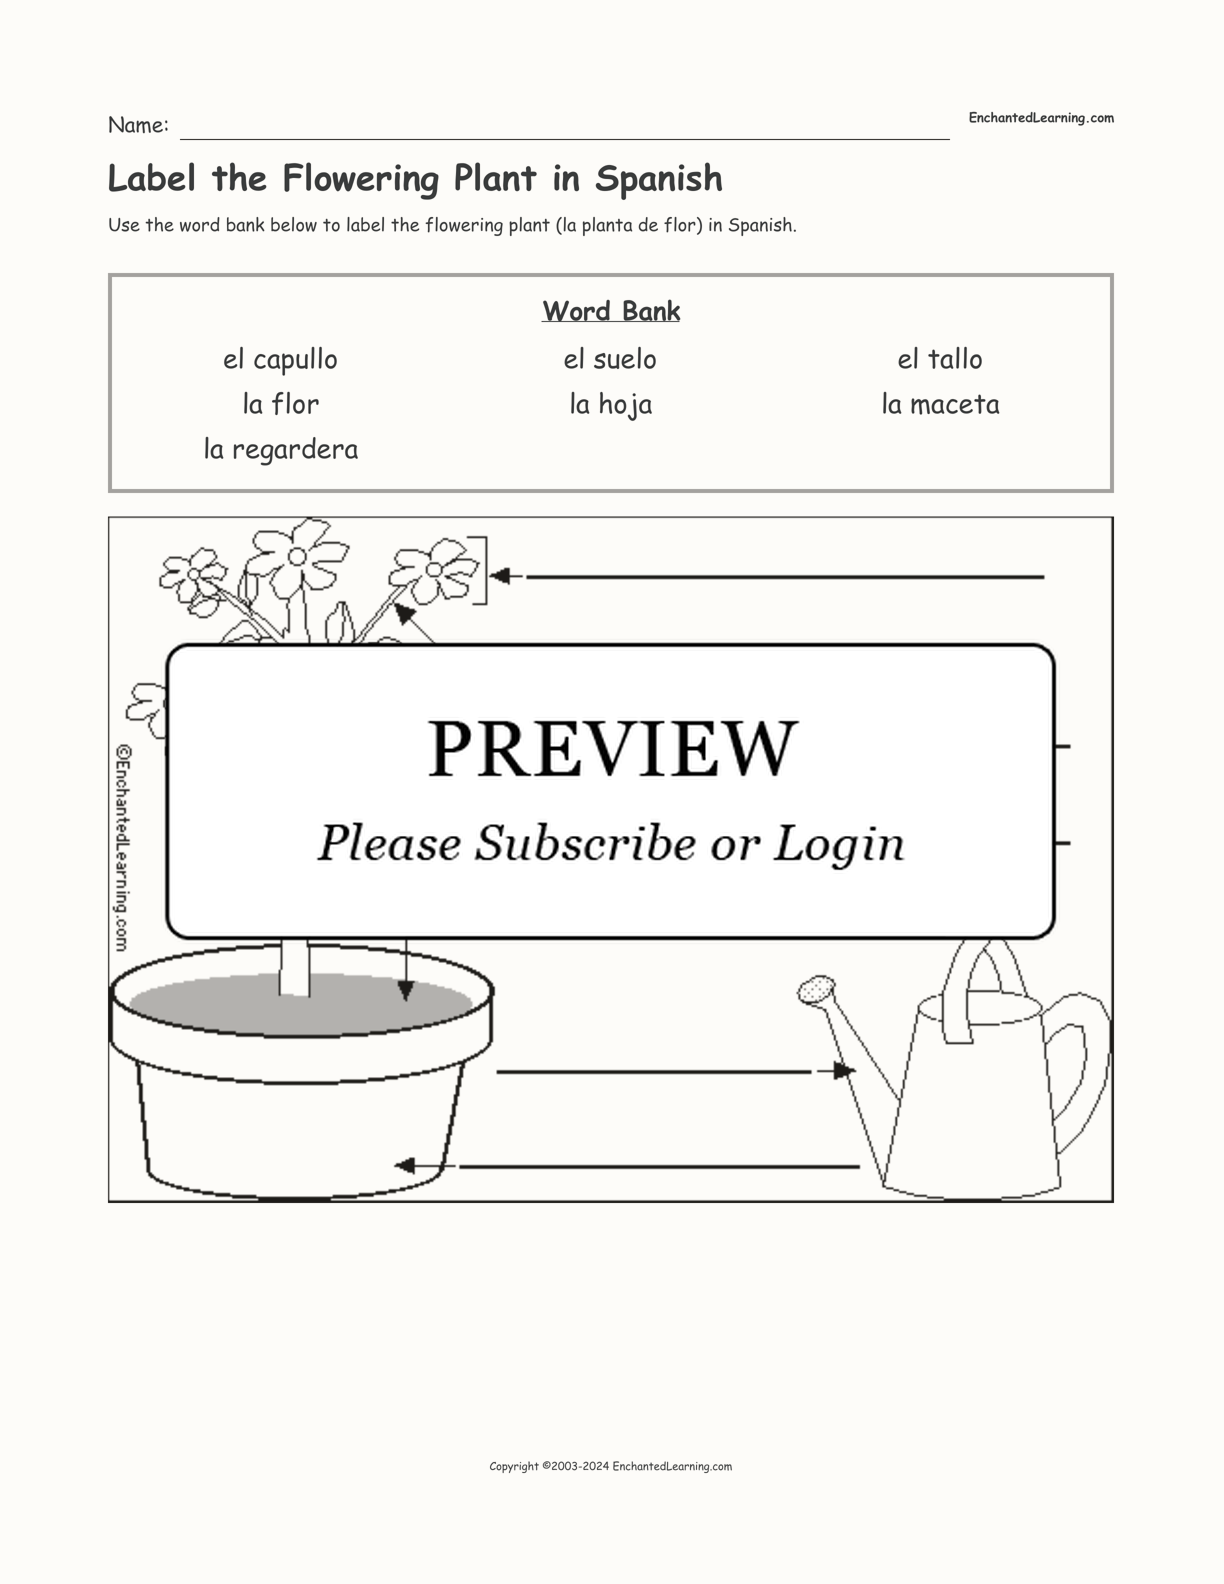 Label the Flowering Plant in Spanish interactive worksheet page 1